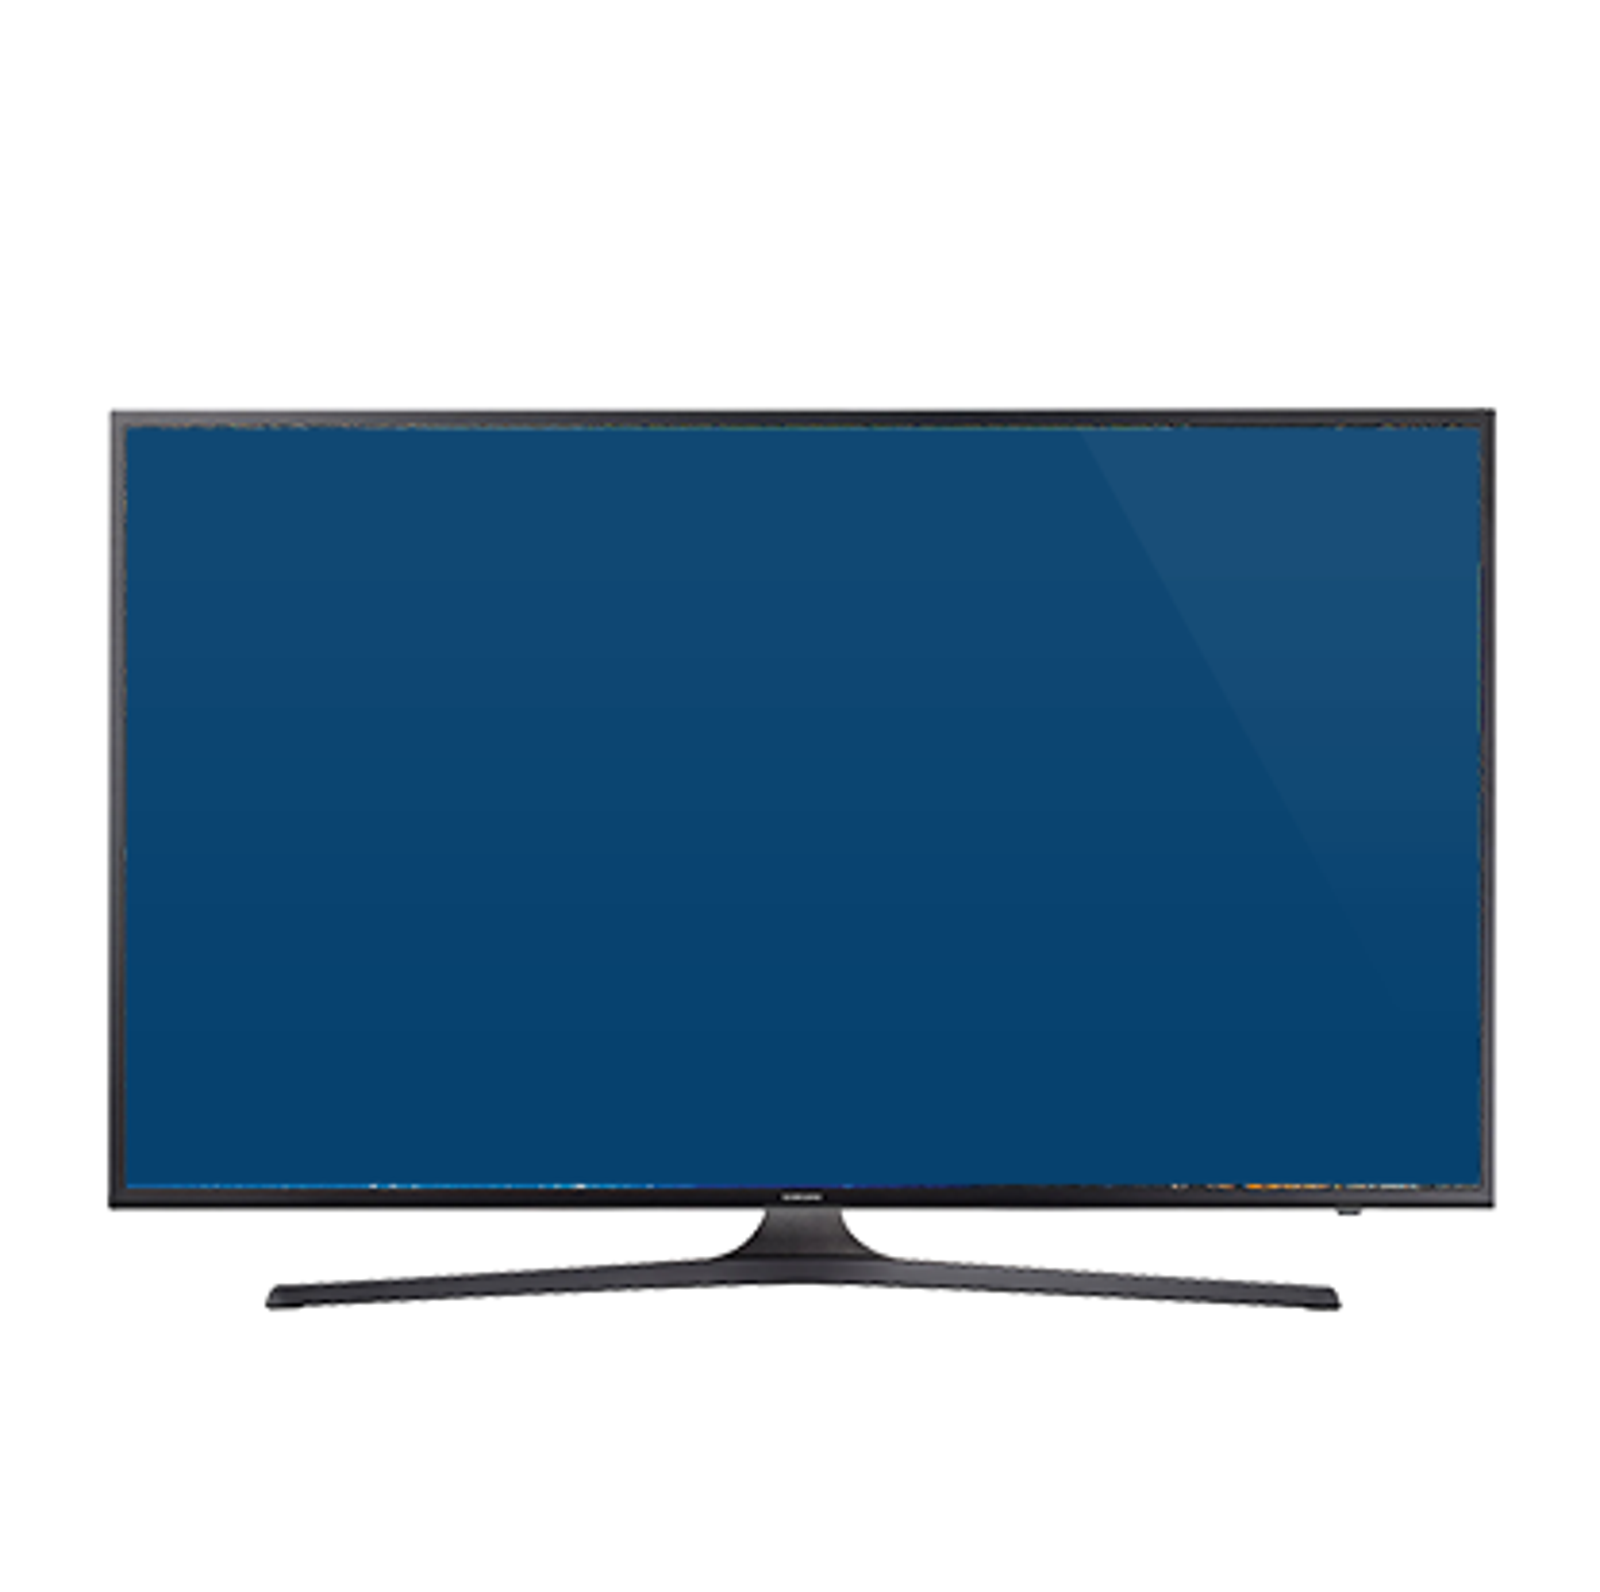 Televisions Smart Curved Hdtv Flat Screen Led 4k